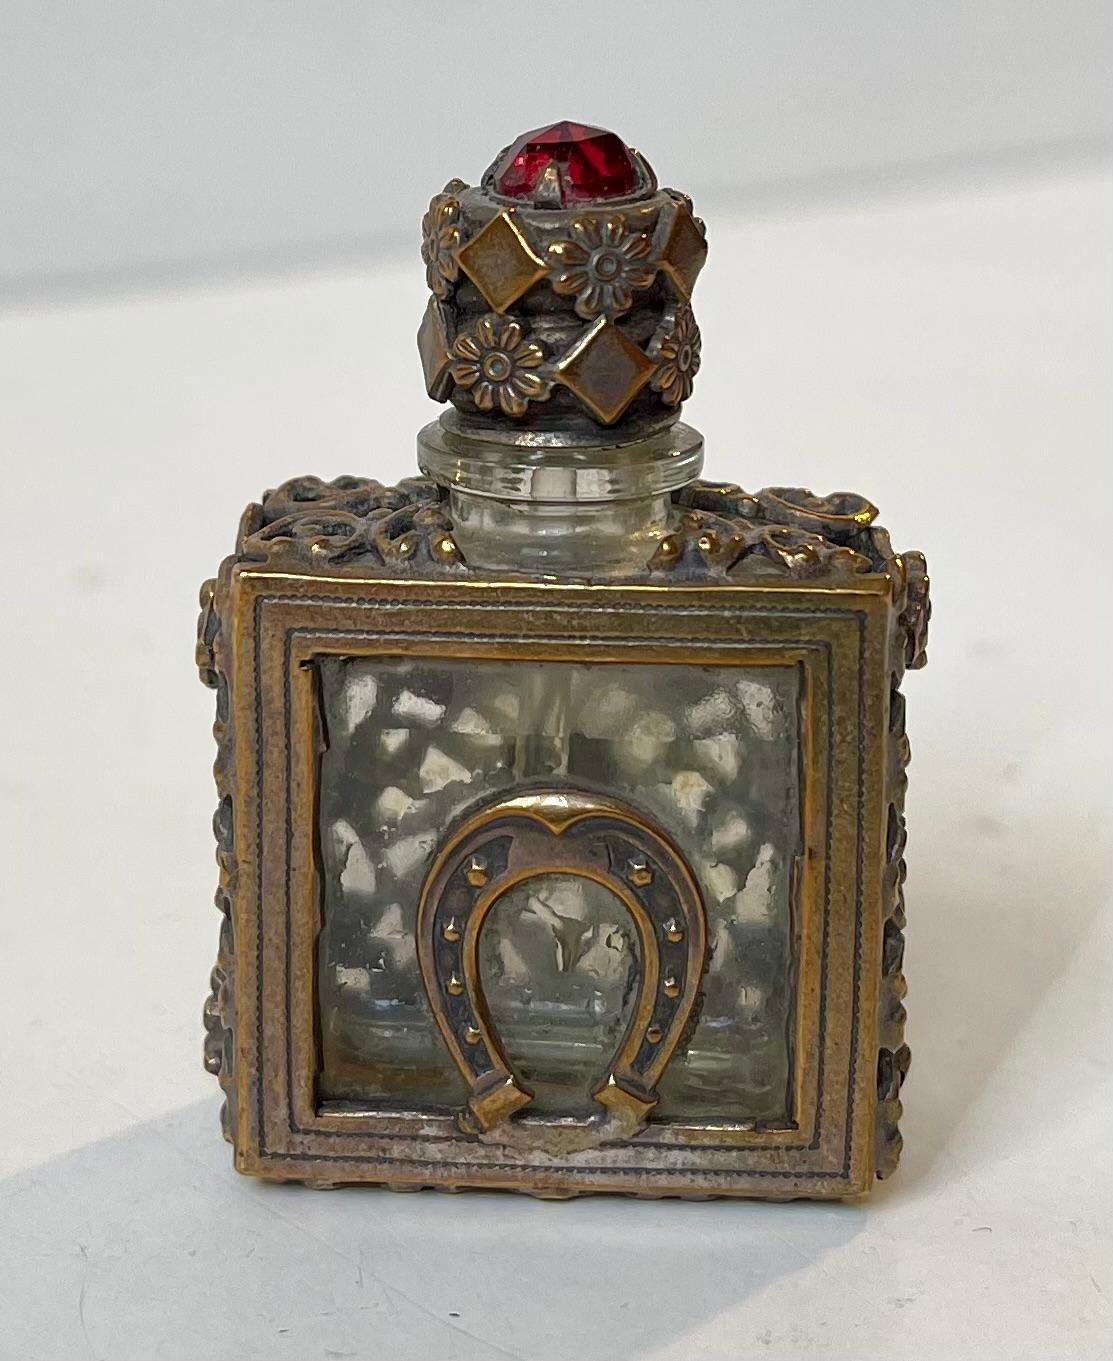 Miniature perfume or scent bottle in crystal and ornate brass. Made in Europe, probably England circa 1850-1890. It features a horseshoe and it has a faceted garnet or red piece of glass to its lid. Measurements: 4.5x3x2 cm.